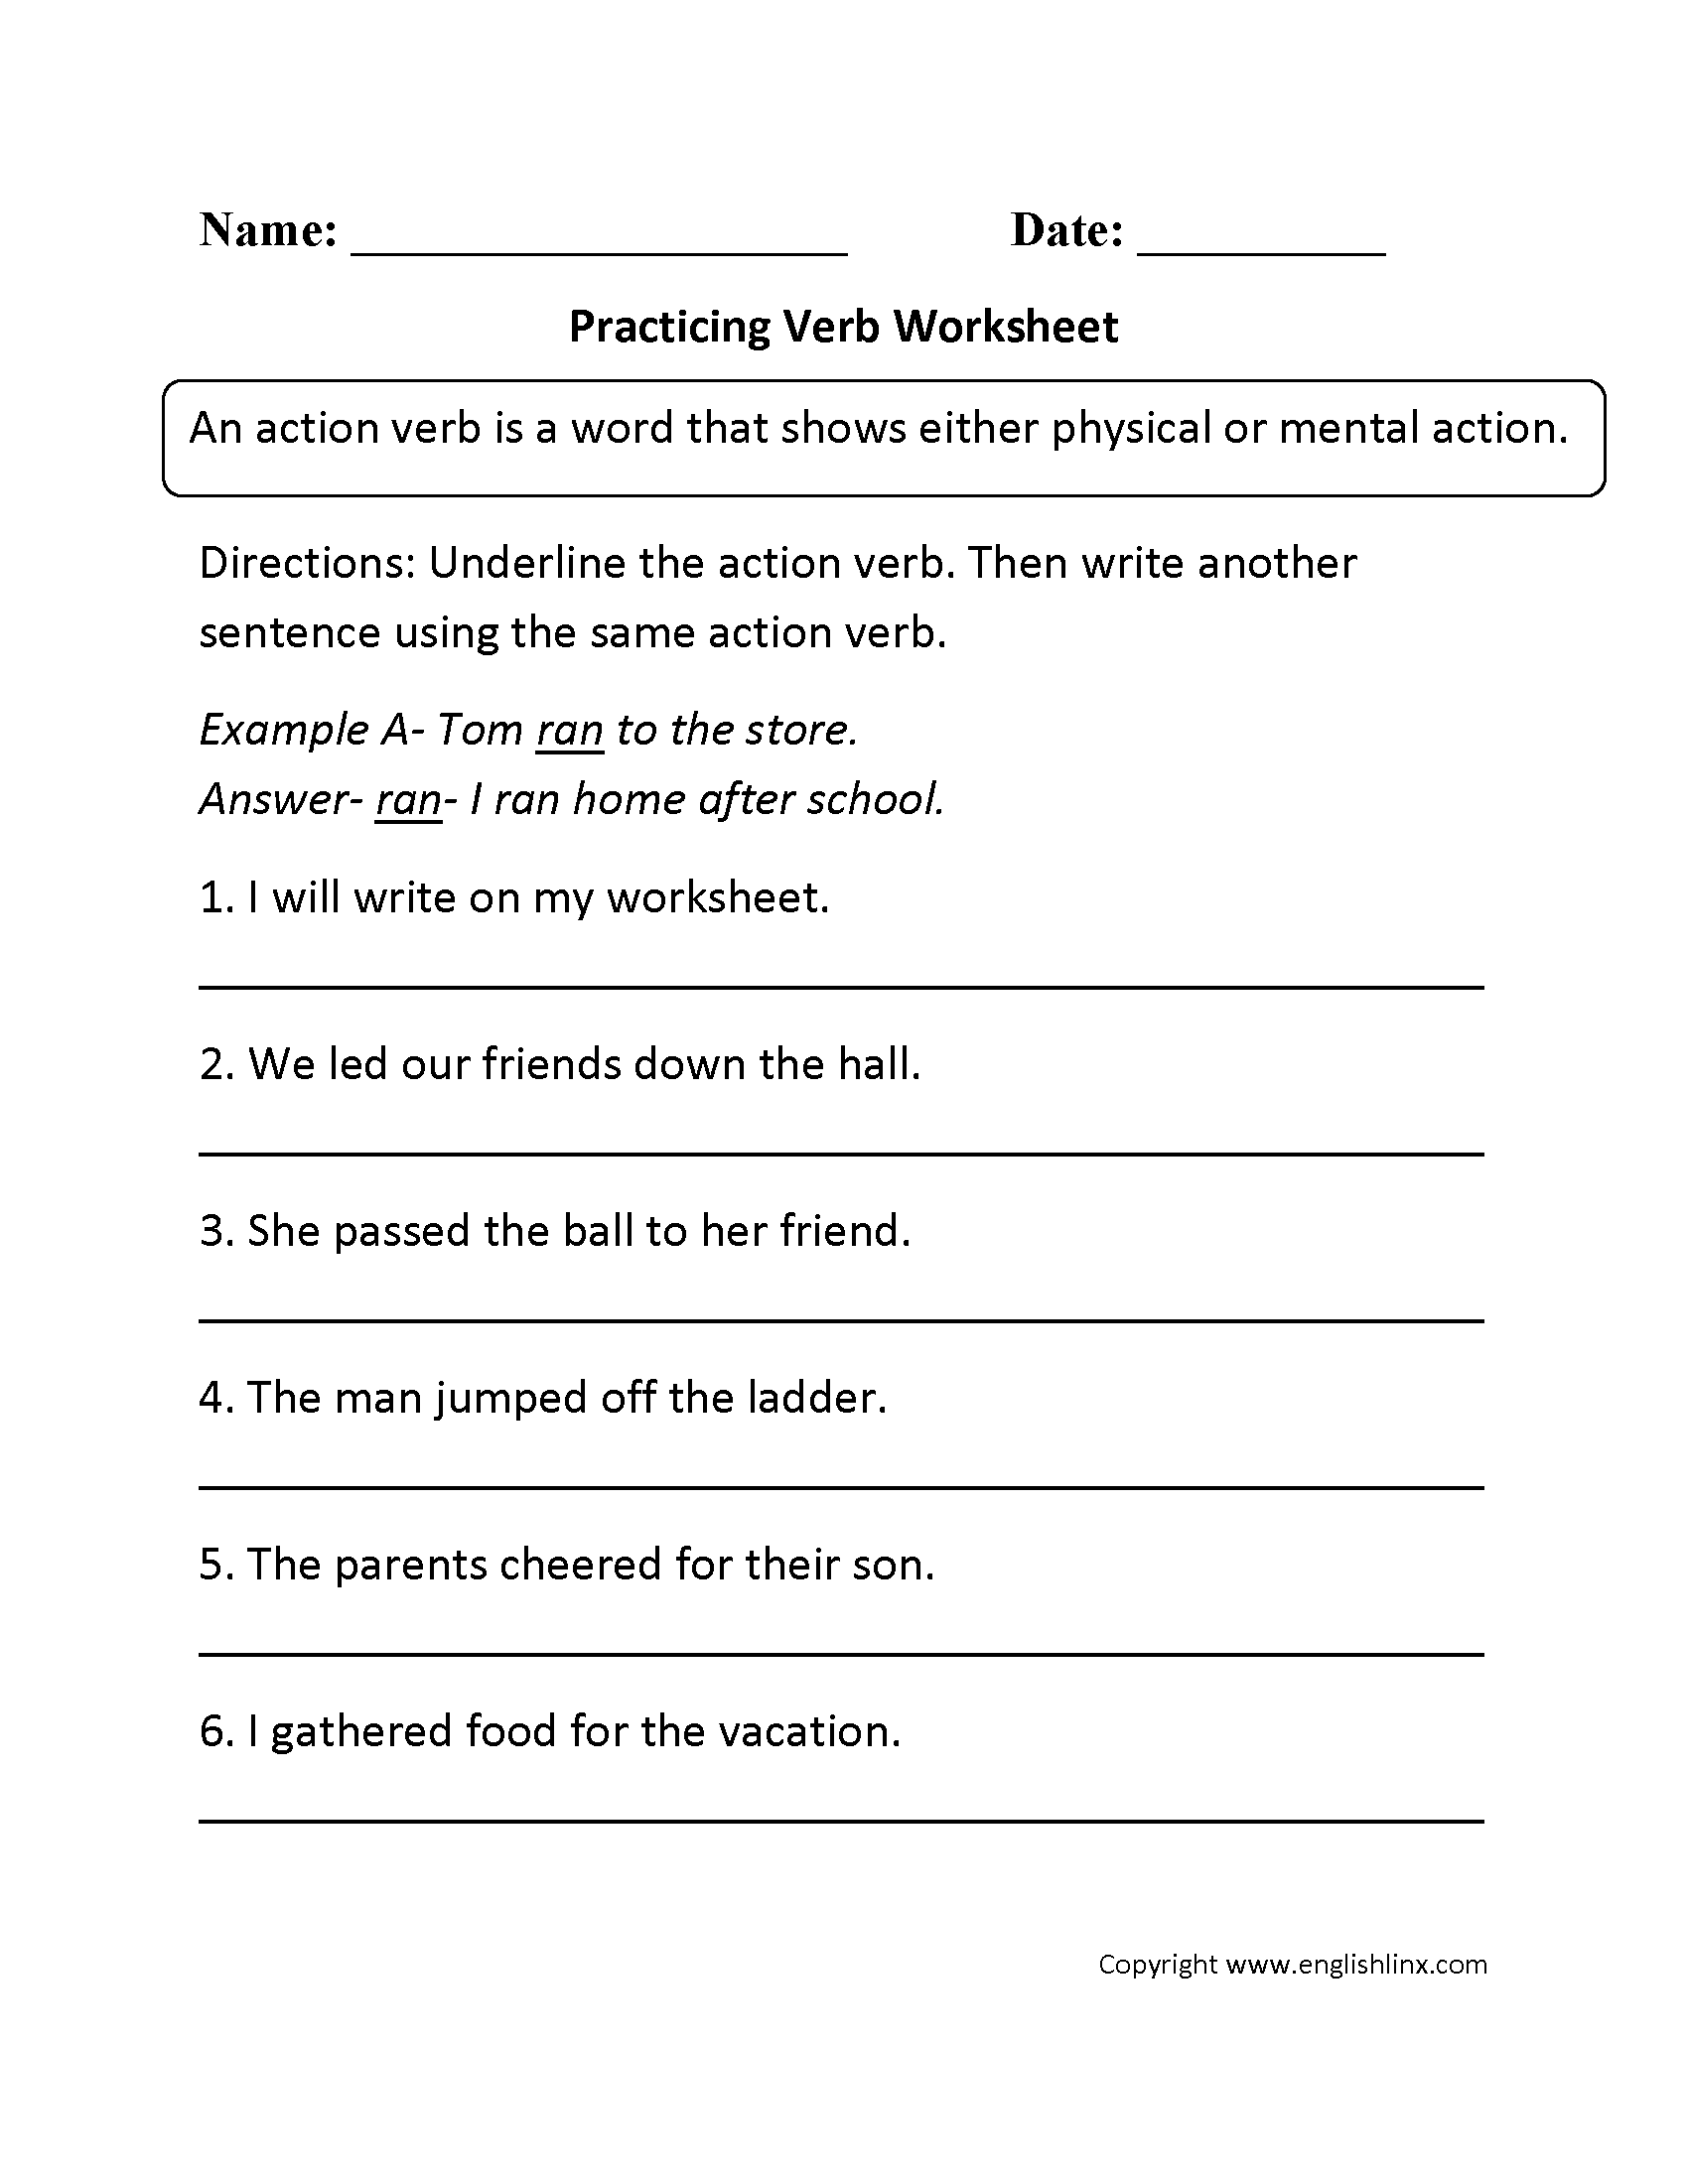 subject-verb-agreement-interactive-exercises-worksheet-resume-examples